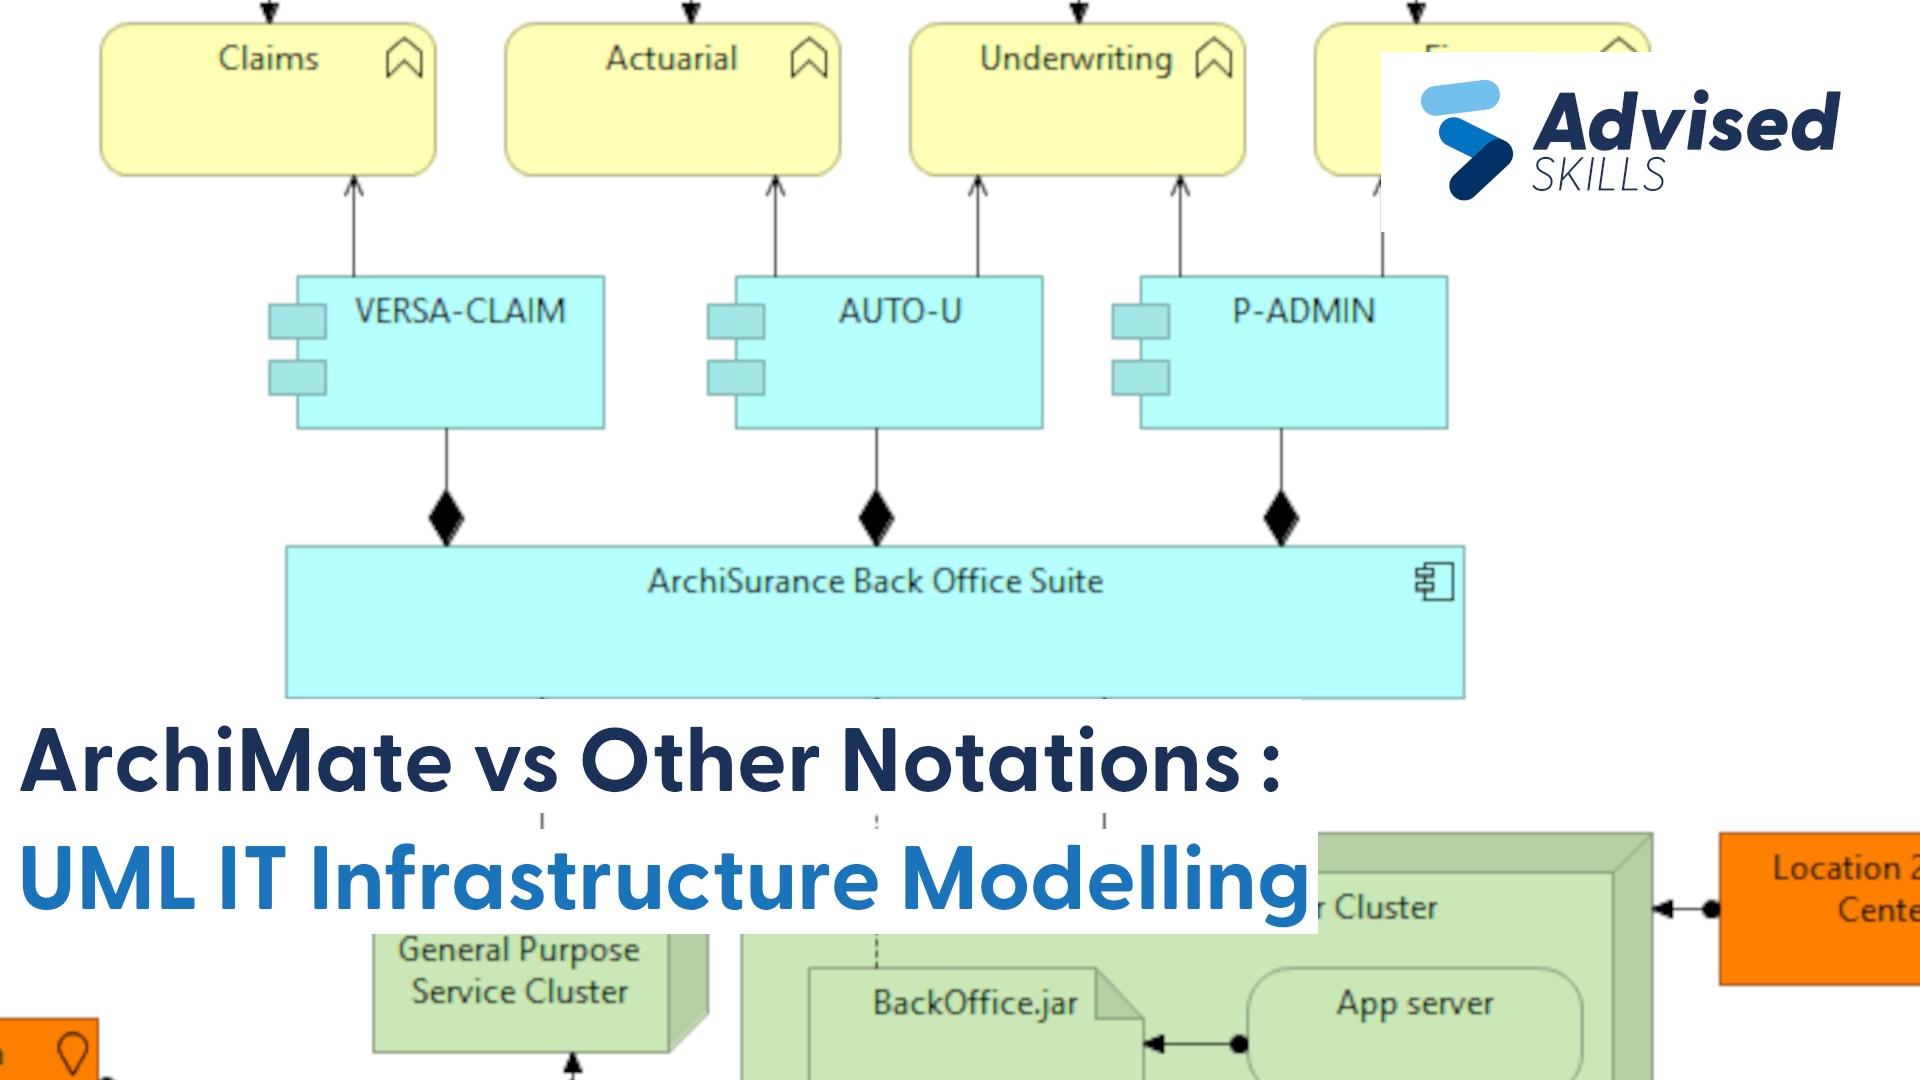 ArchiMate vs Other Notations: UML IT Infrastructure Modelling